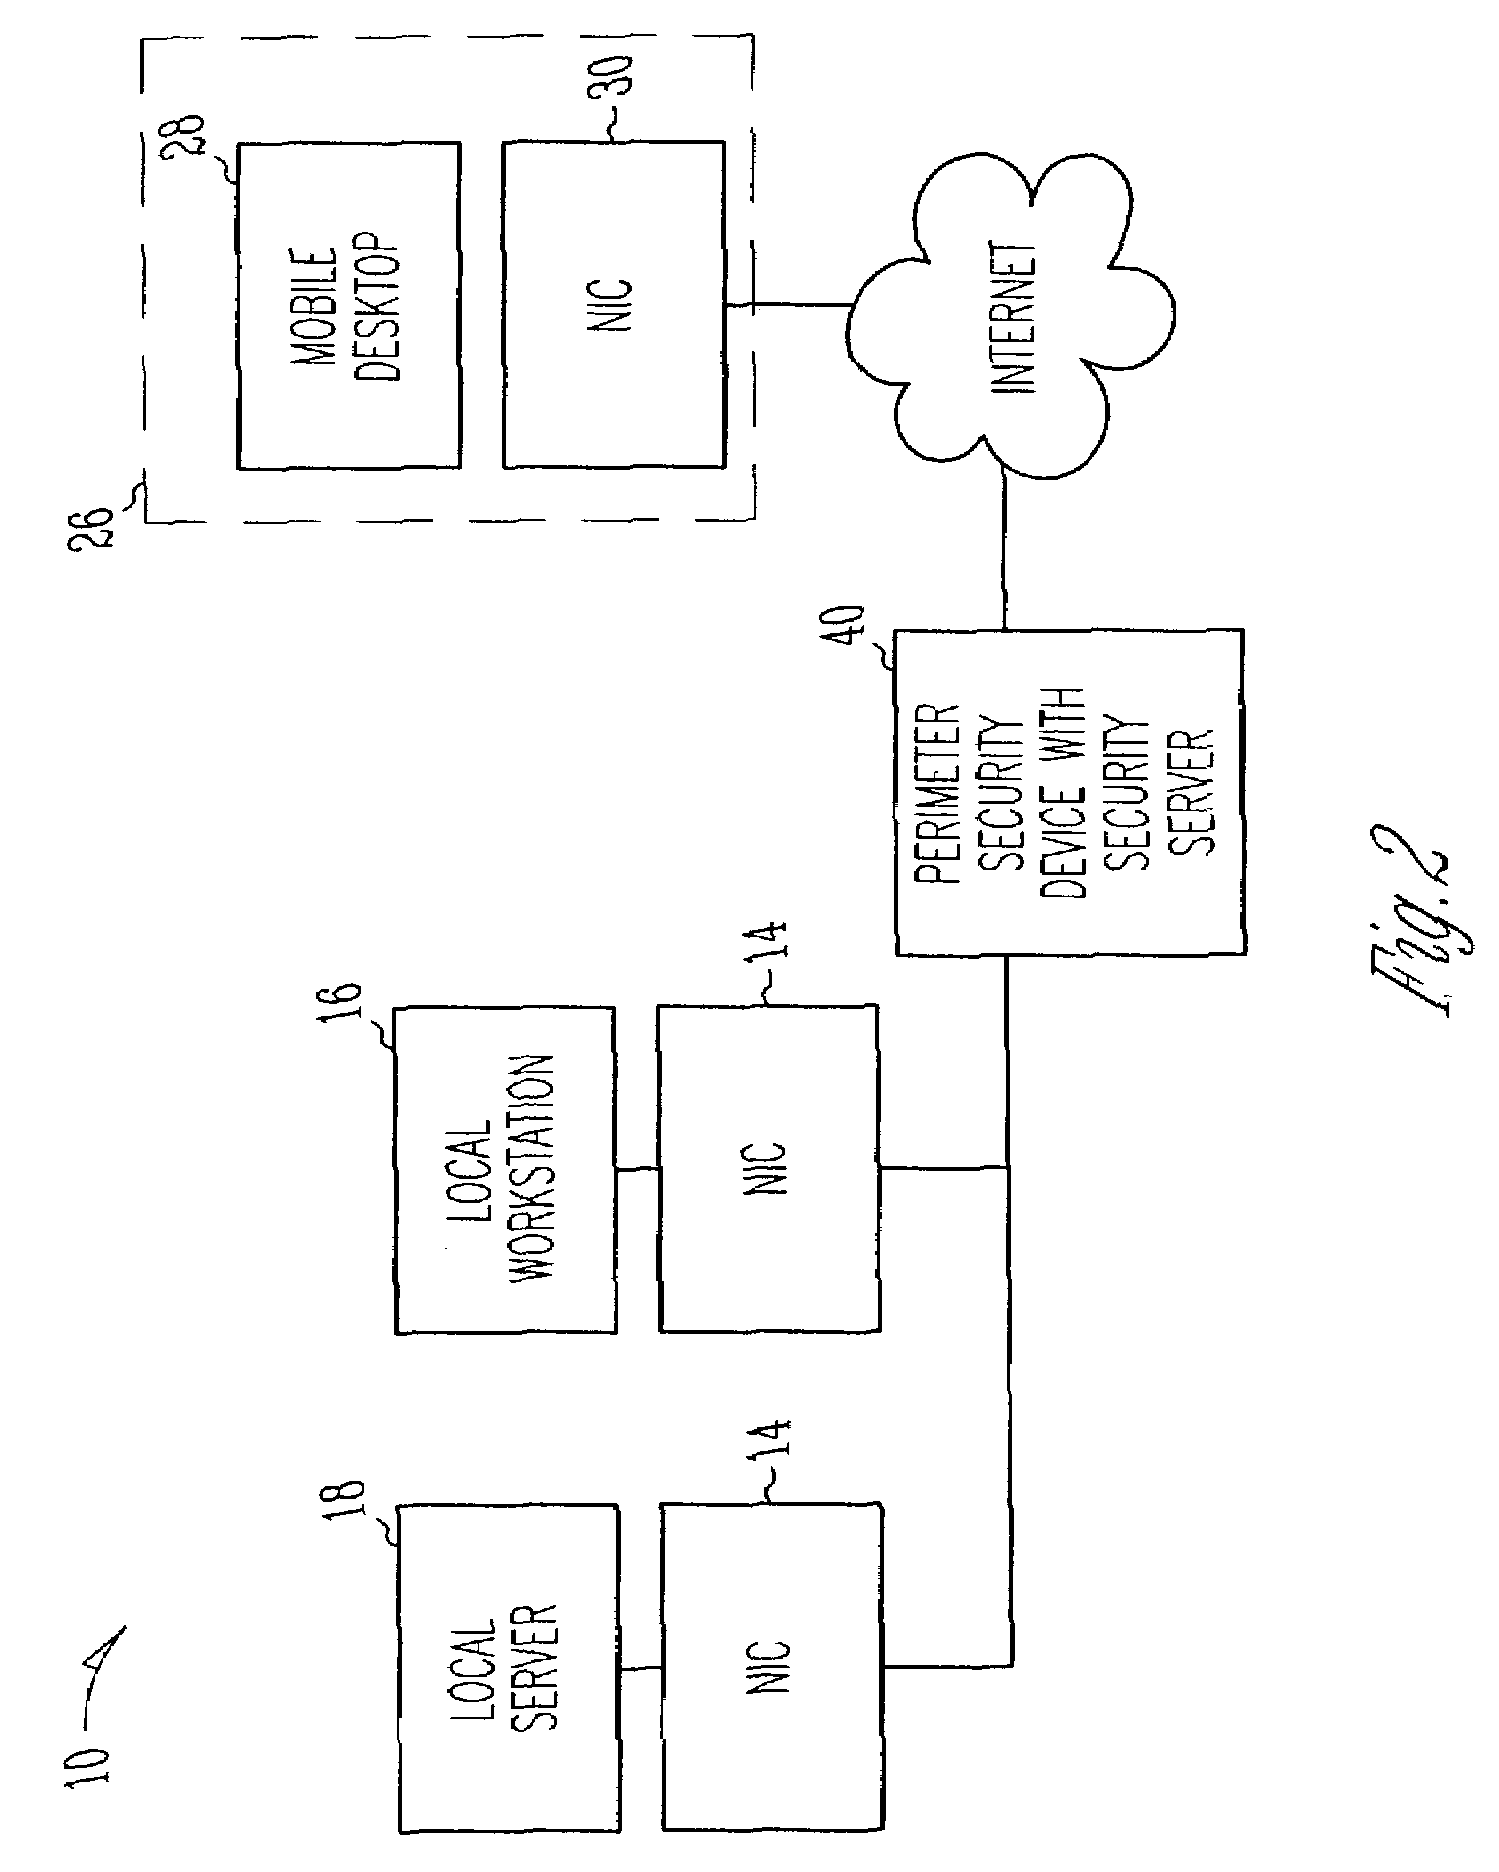 Distributed firewall system and method